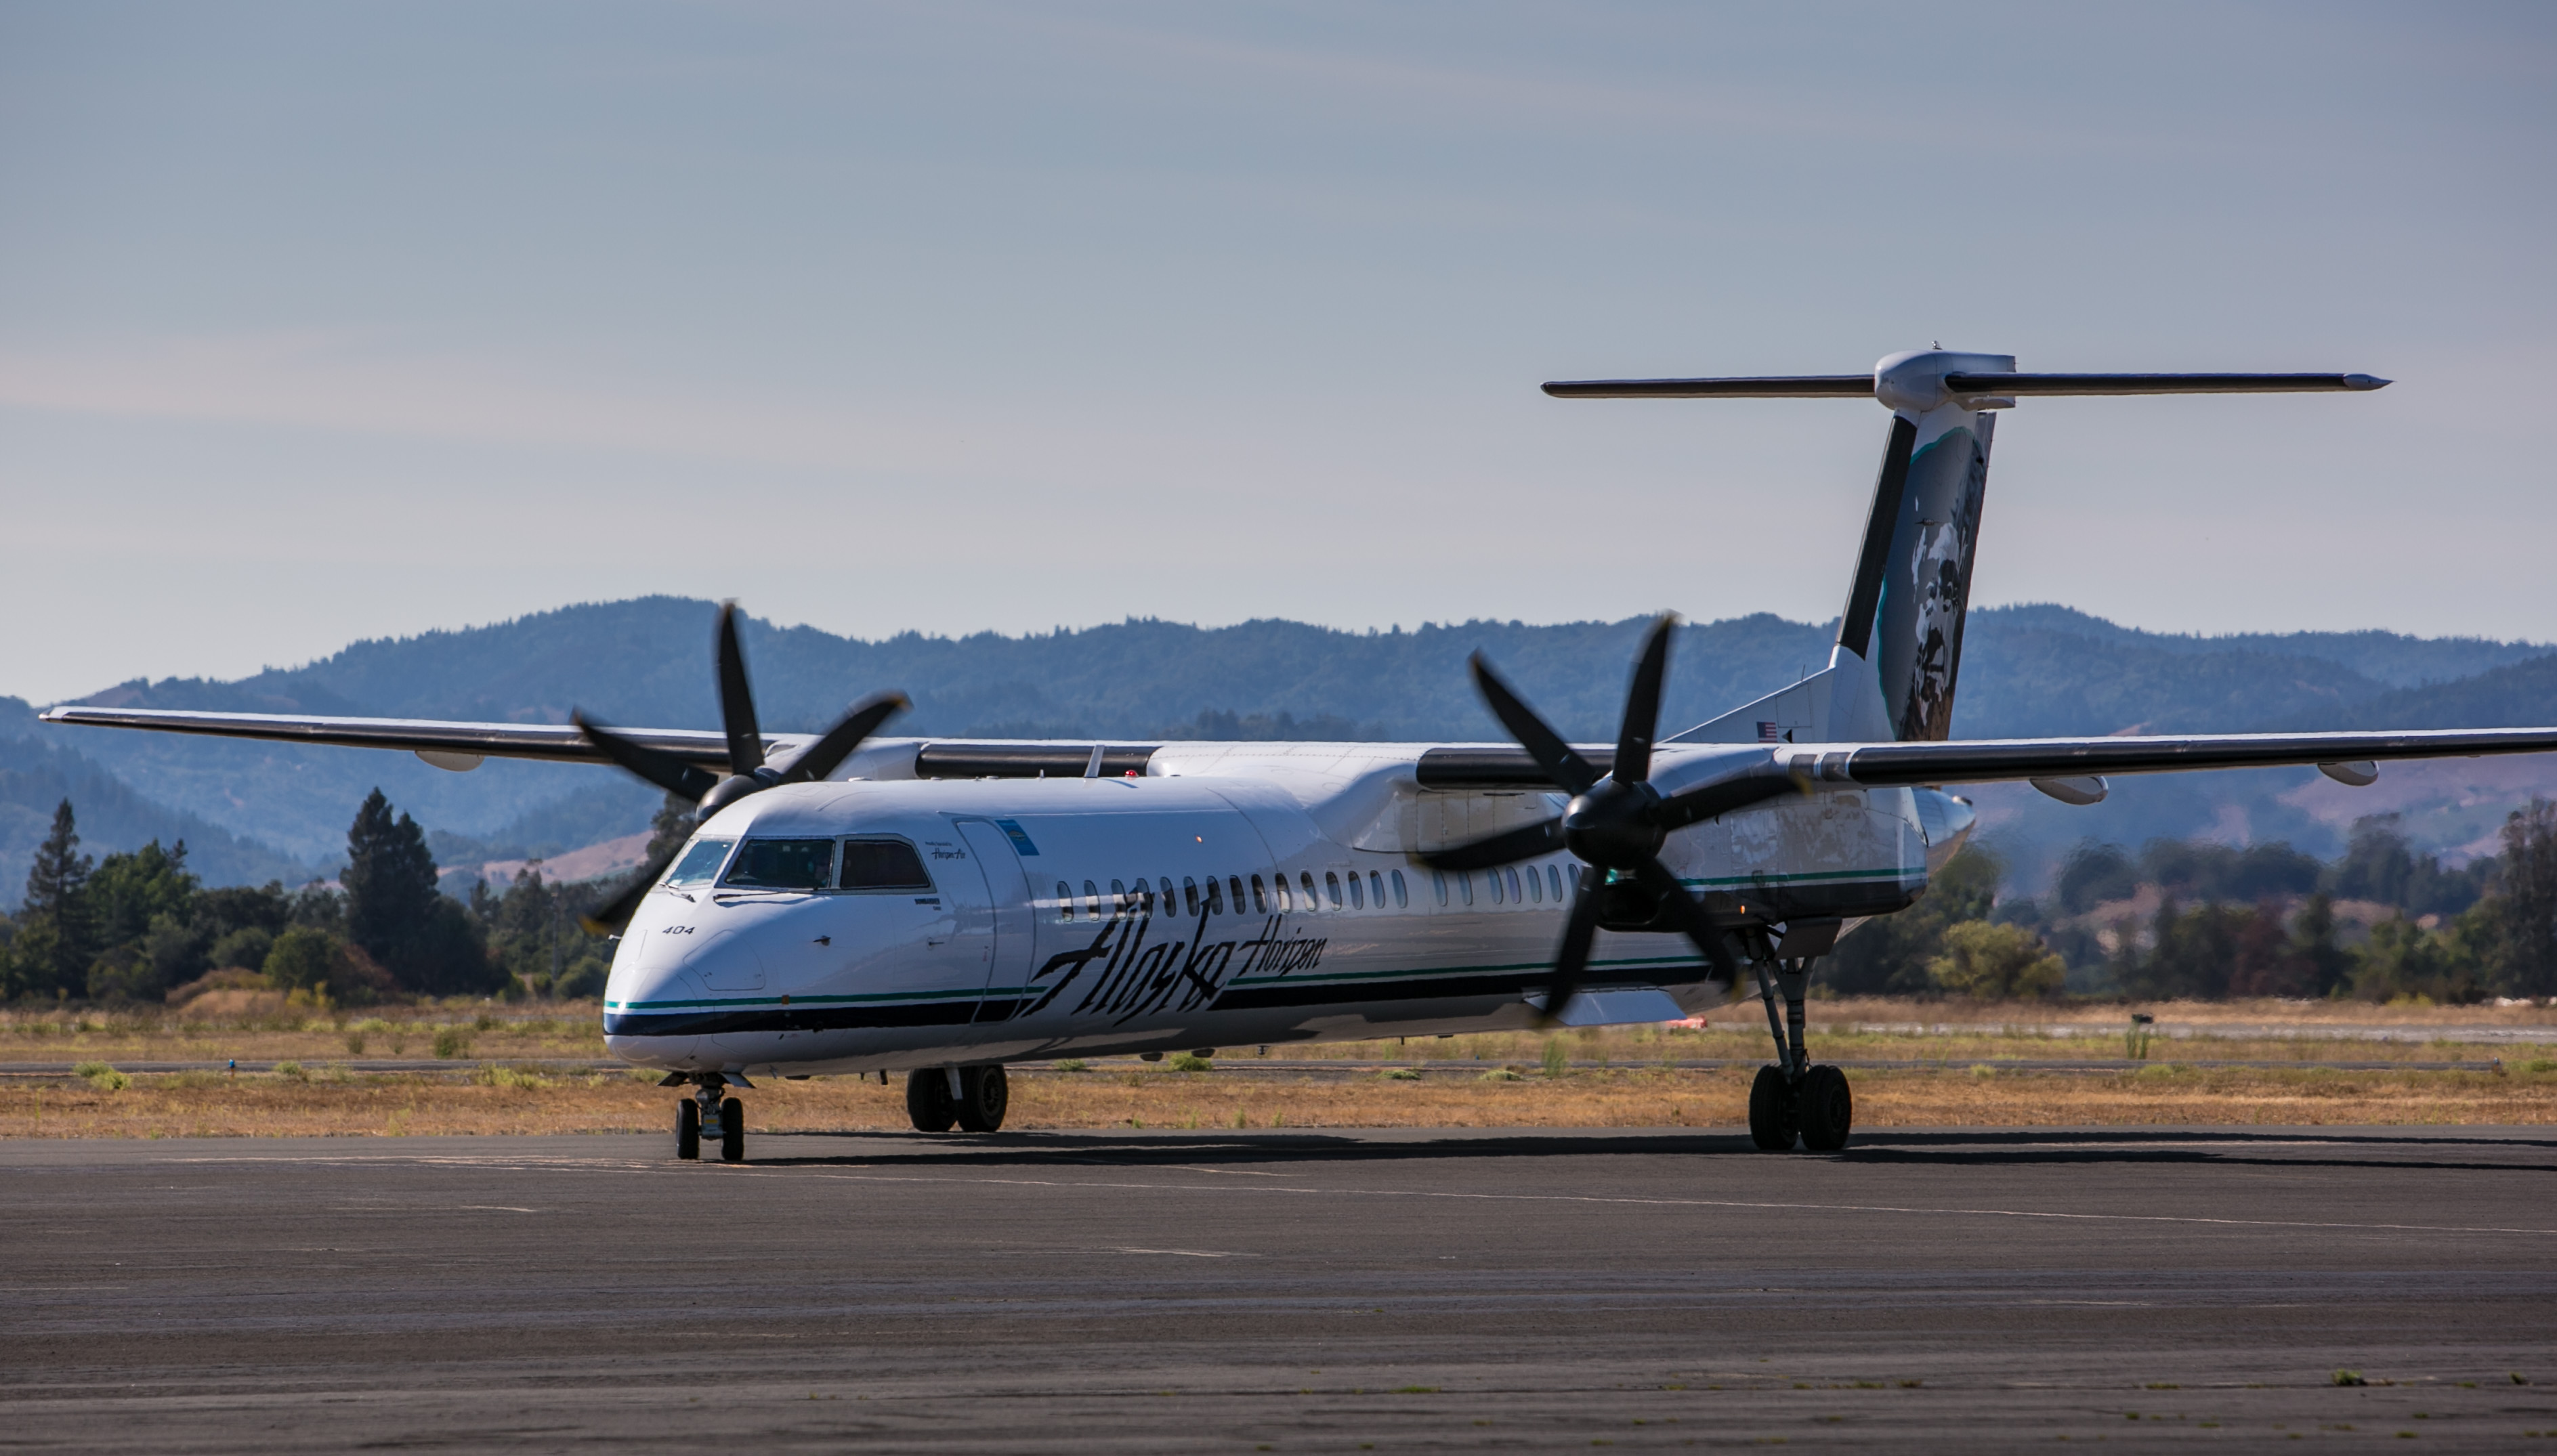 An Alaska Airlines Bombardier Q-400 regional turbo prop plane pulls into the gate at Charles M. Schulz Airport on August 27, 2014, near Healdsburg, California.